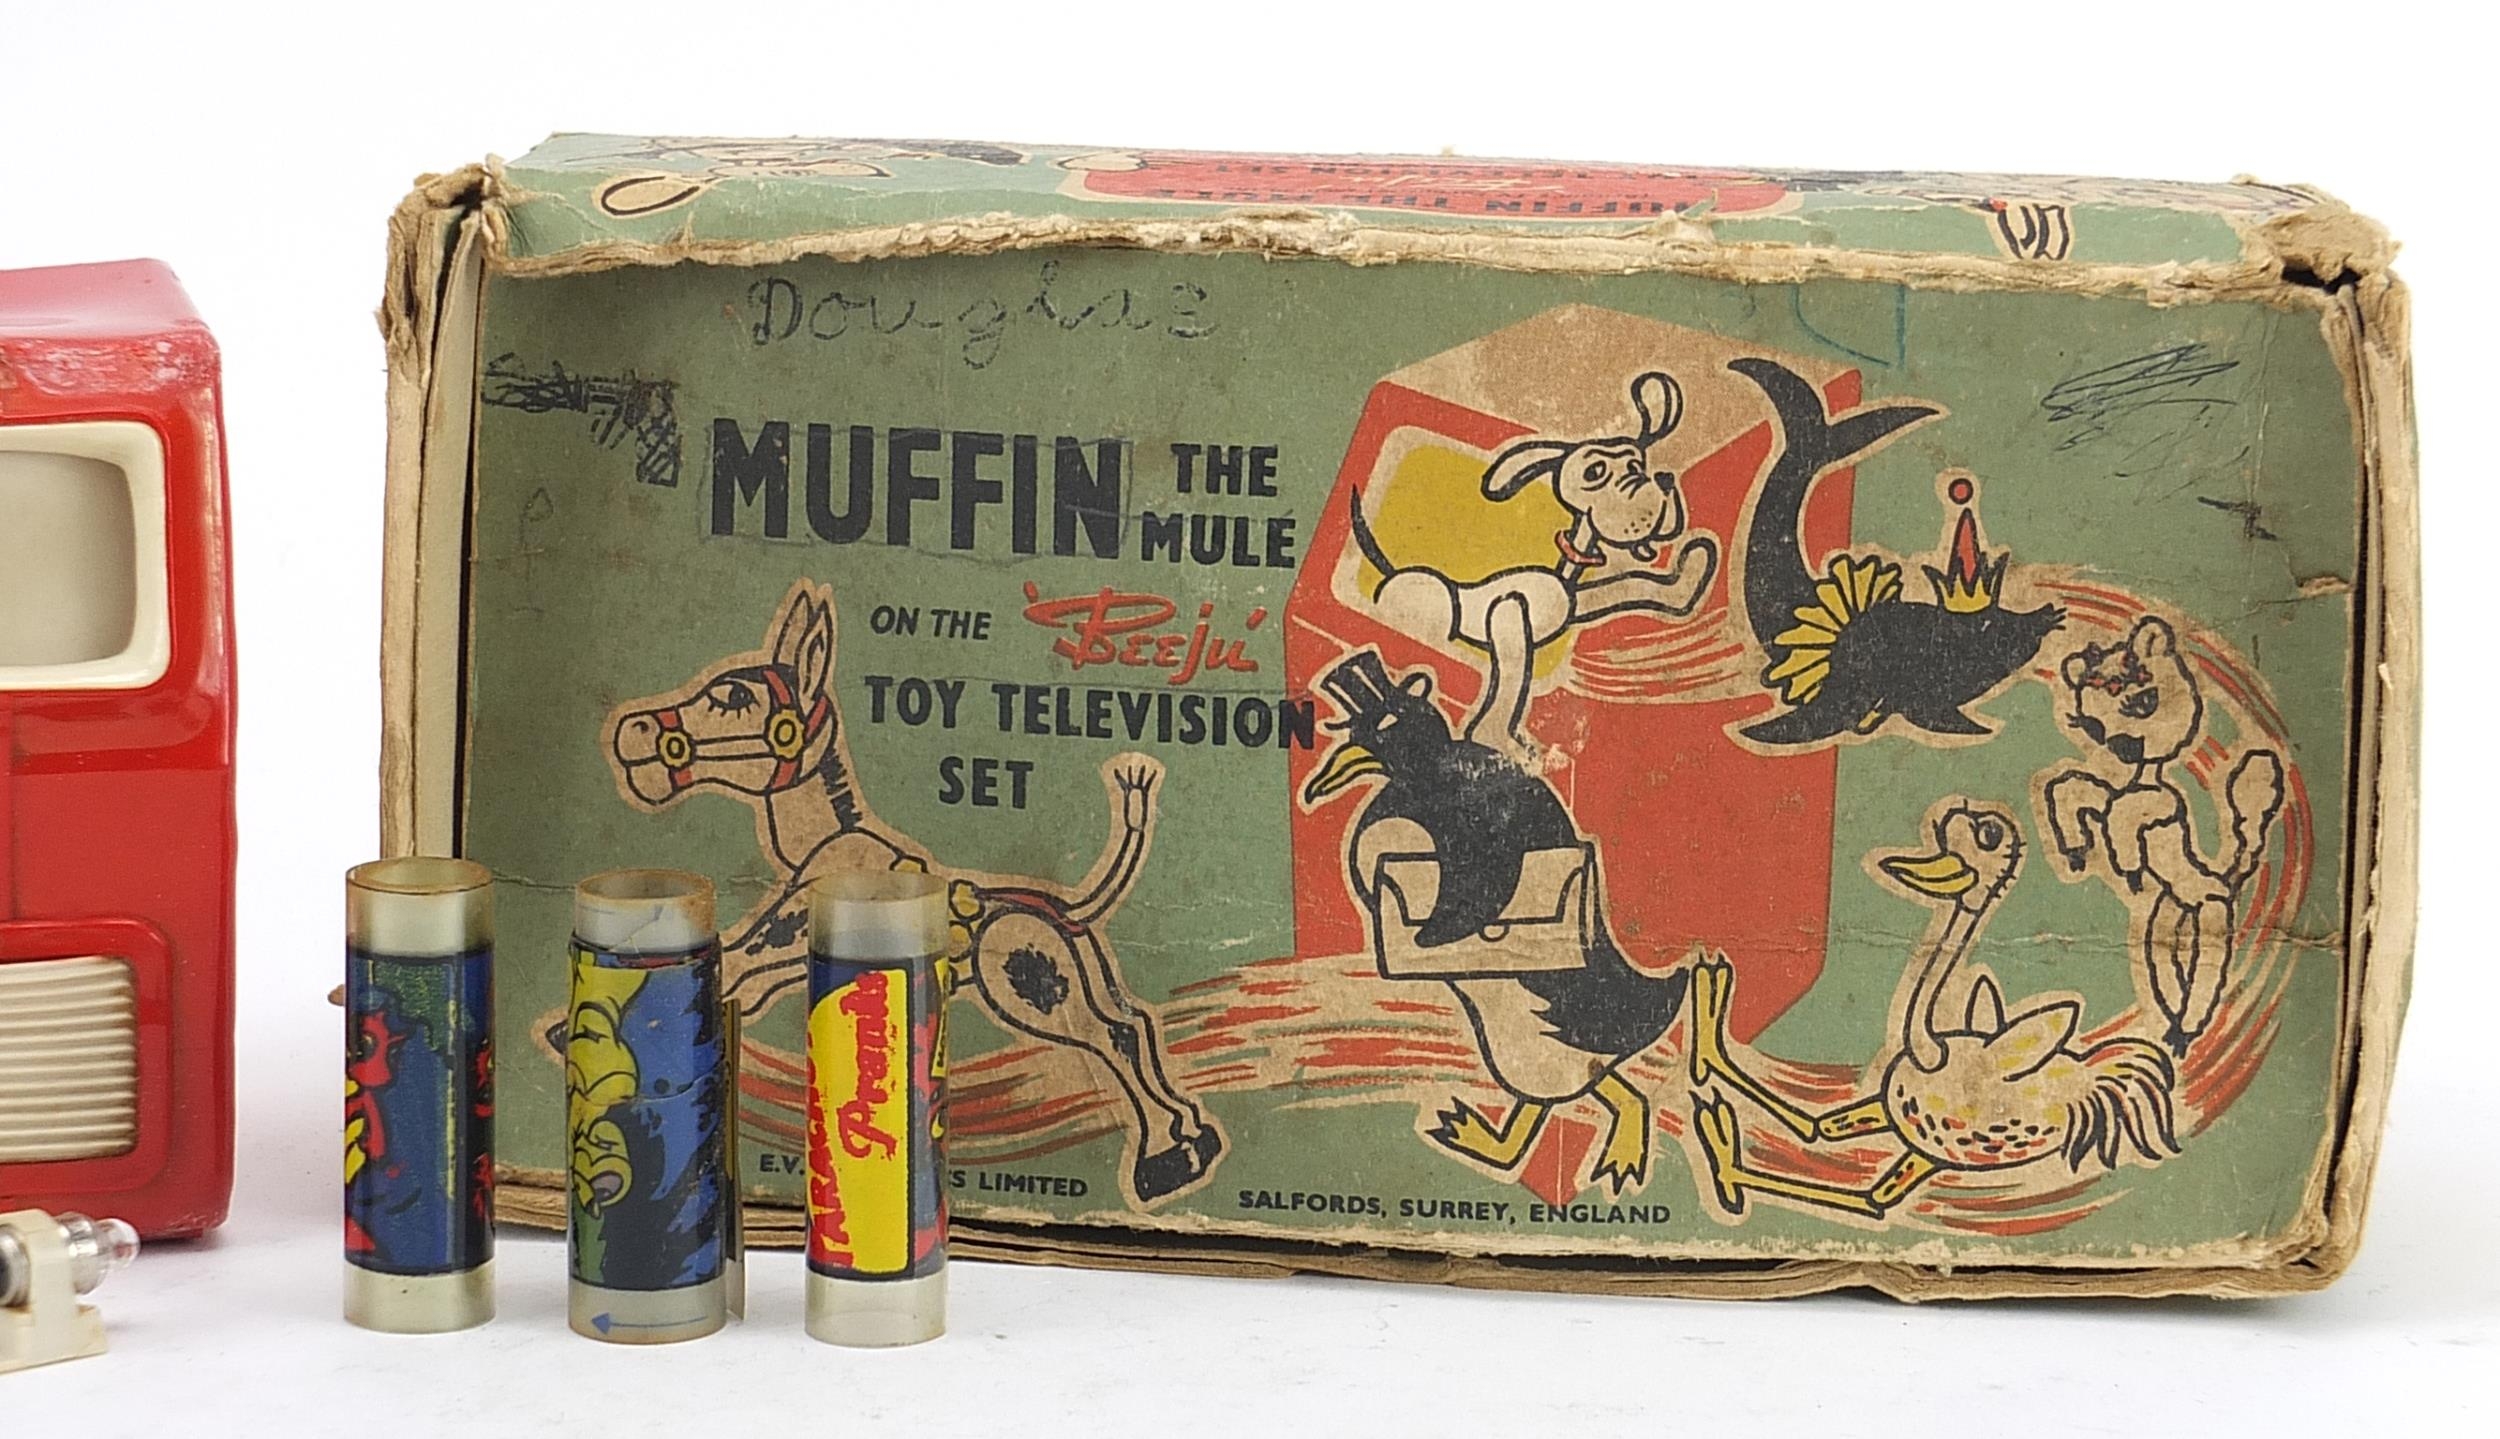 Vintage Muffin the Mule toy television set with box by EVB Plastics Ltd - Image 3 of 3